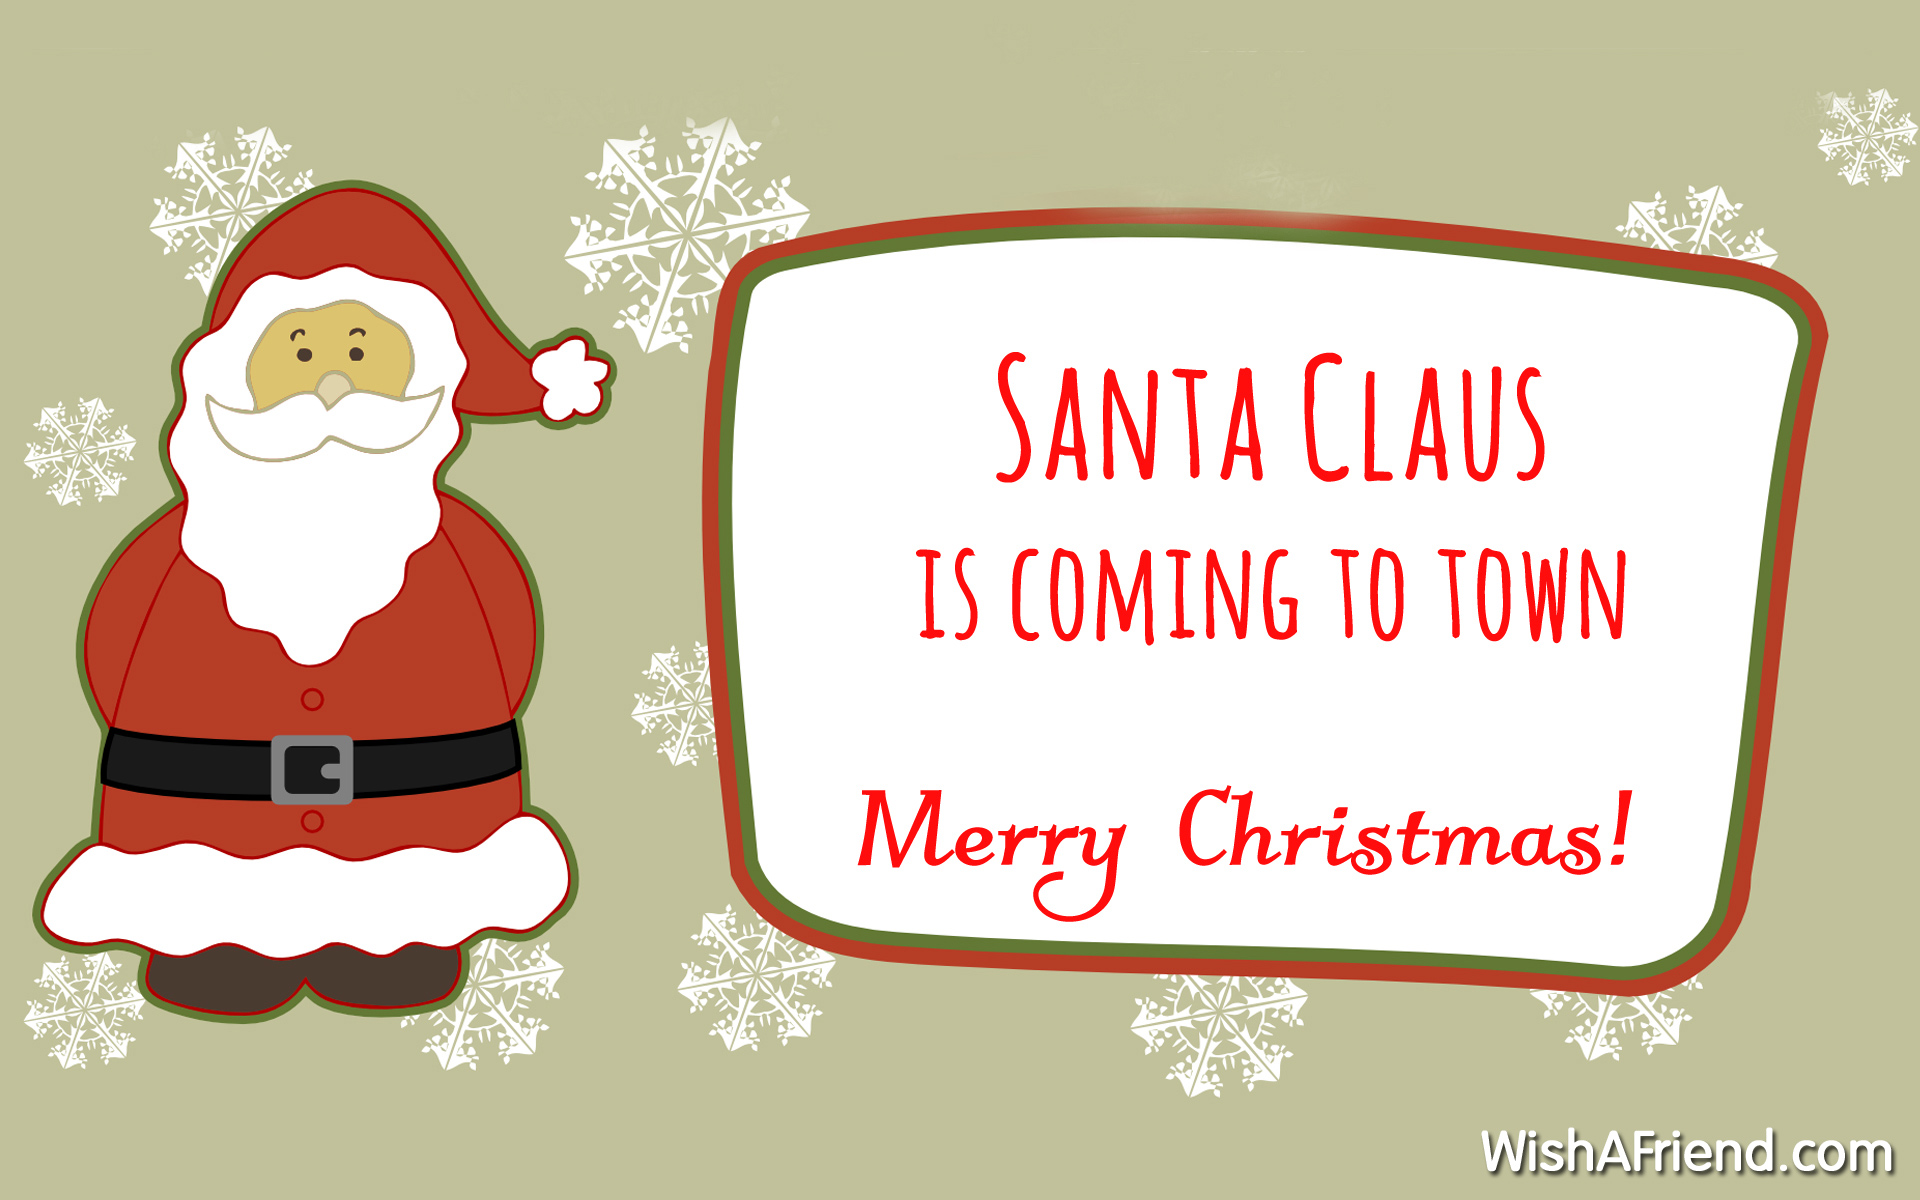 Santa Claus is coming to